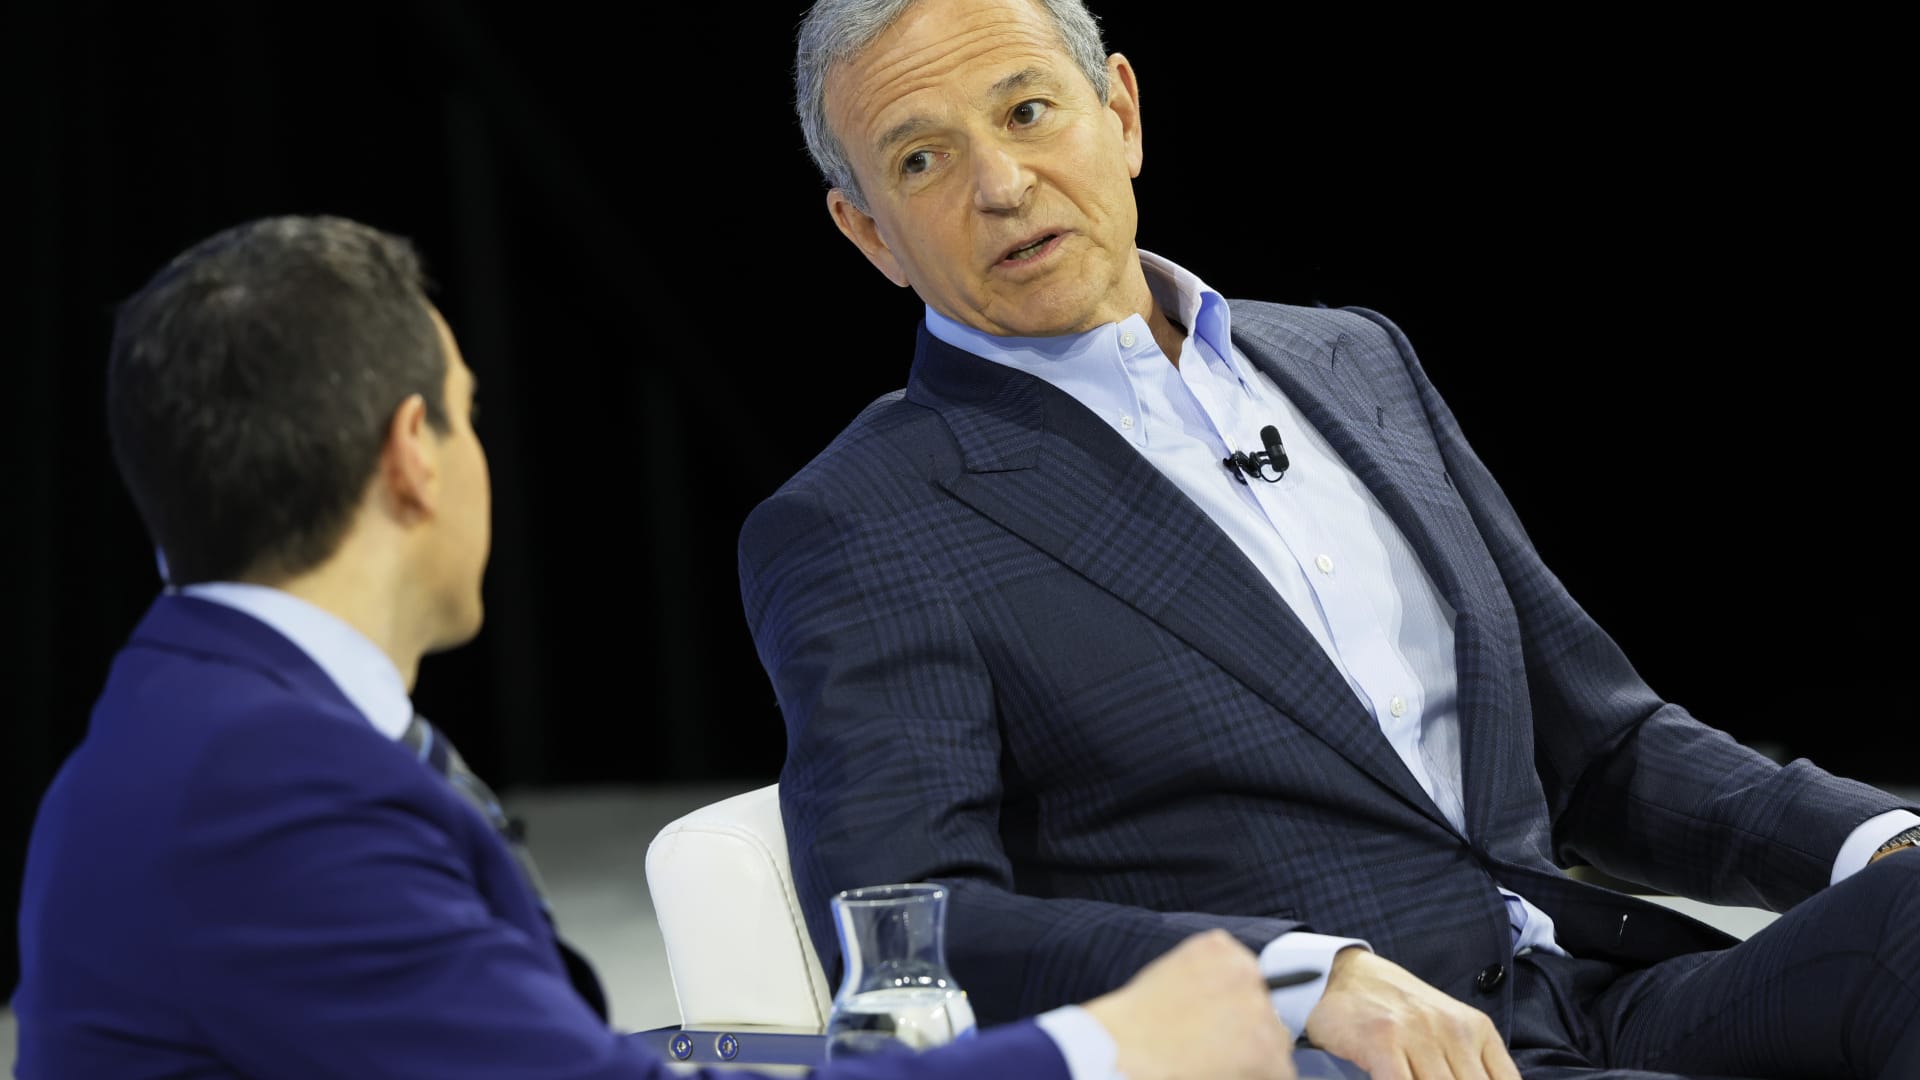 Disney CEO Bob Iger says movies have been too focused on messaging